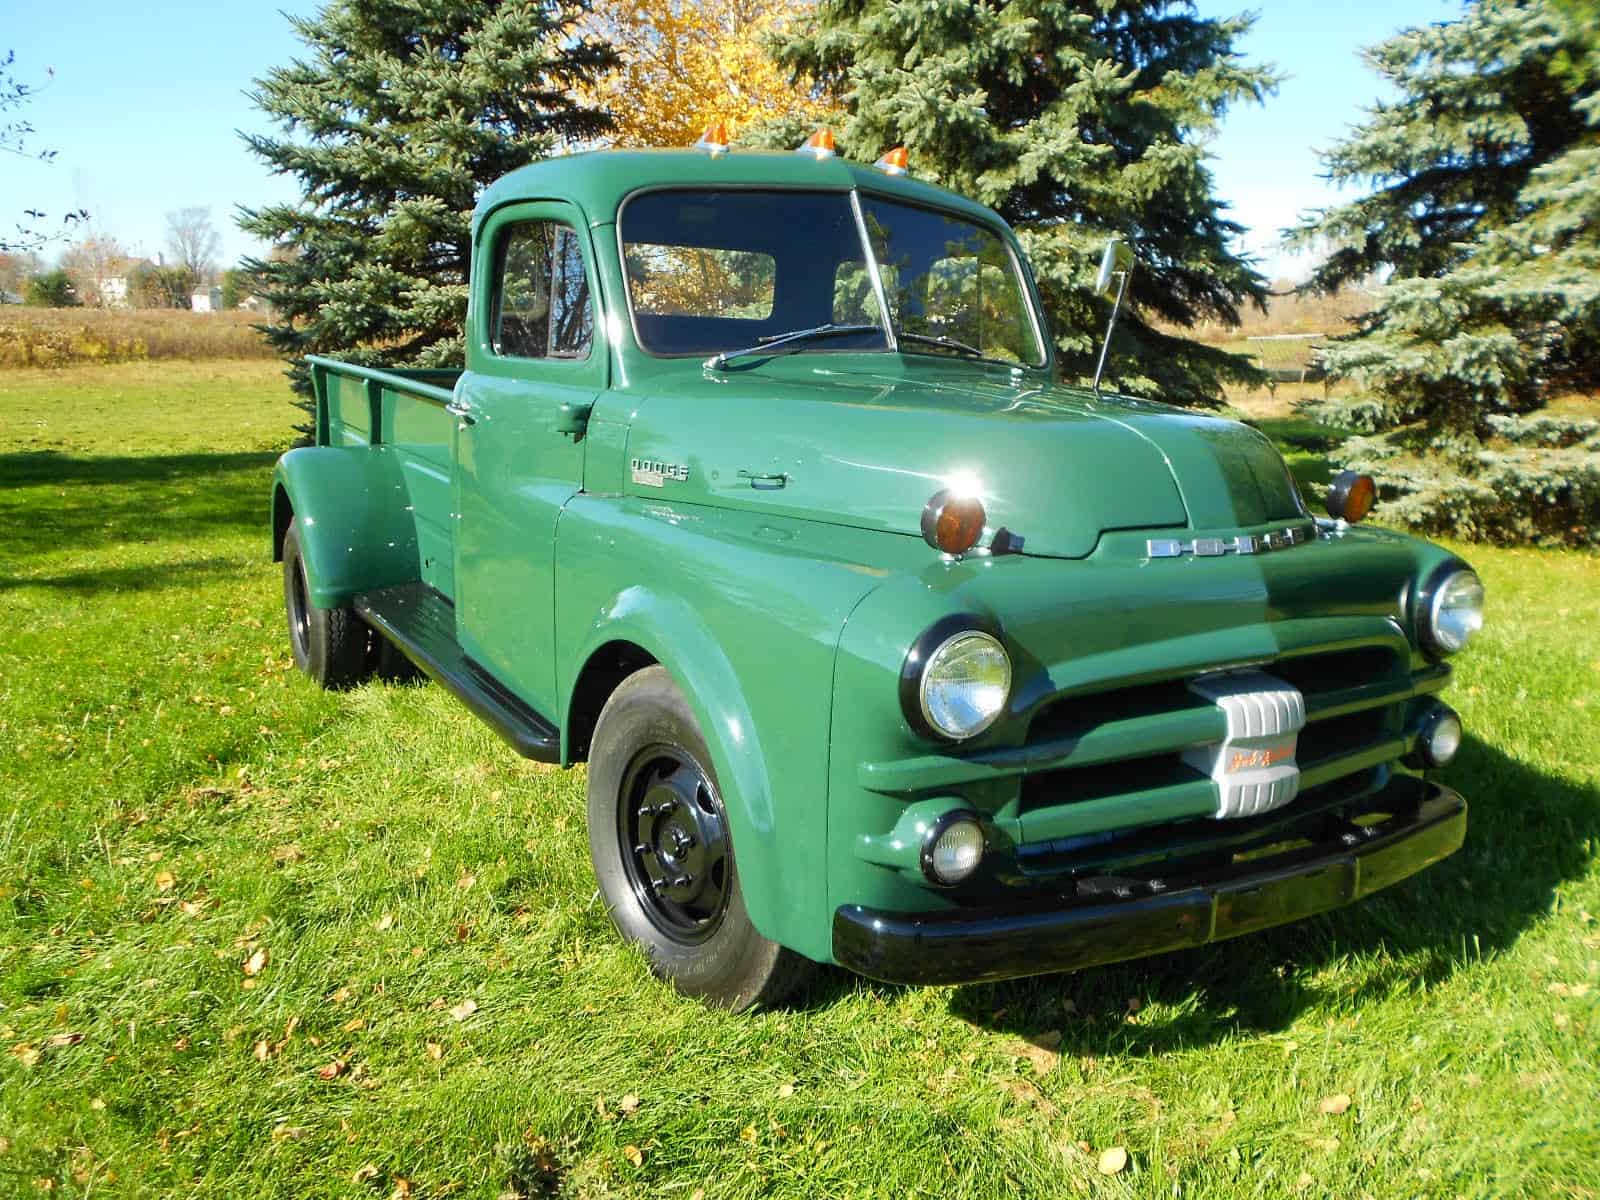 Our history of the Dodge dually includes the 1951 B-series Dodge dually